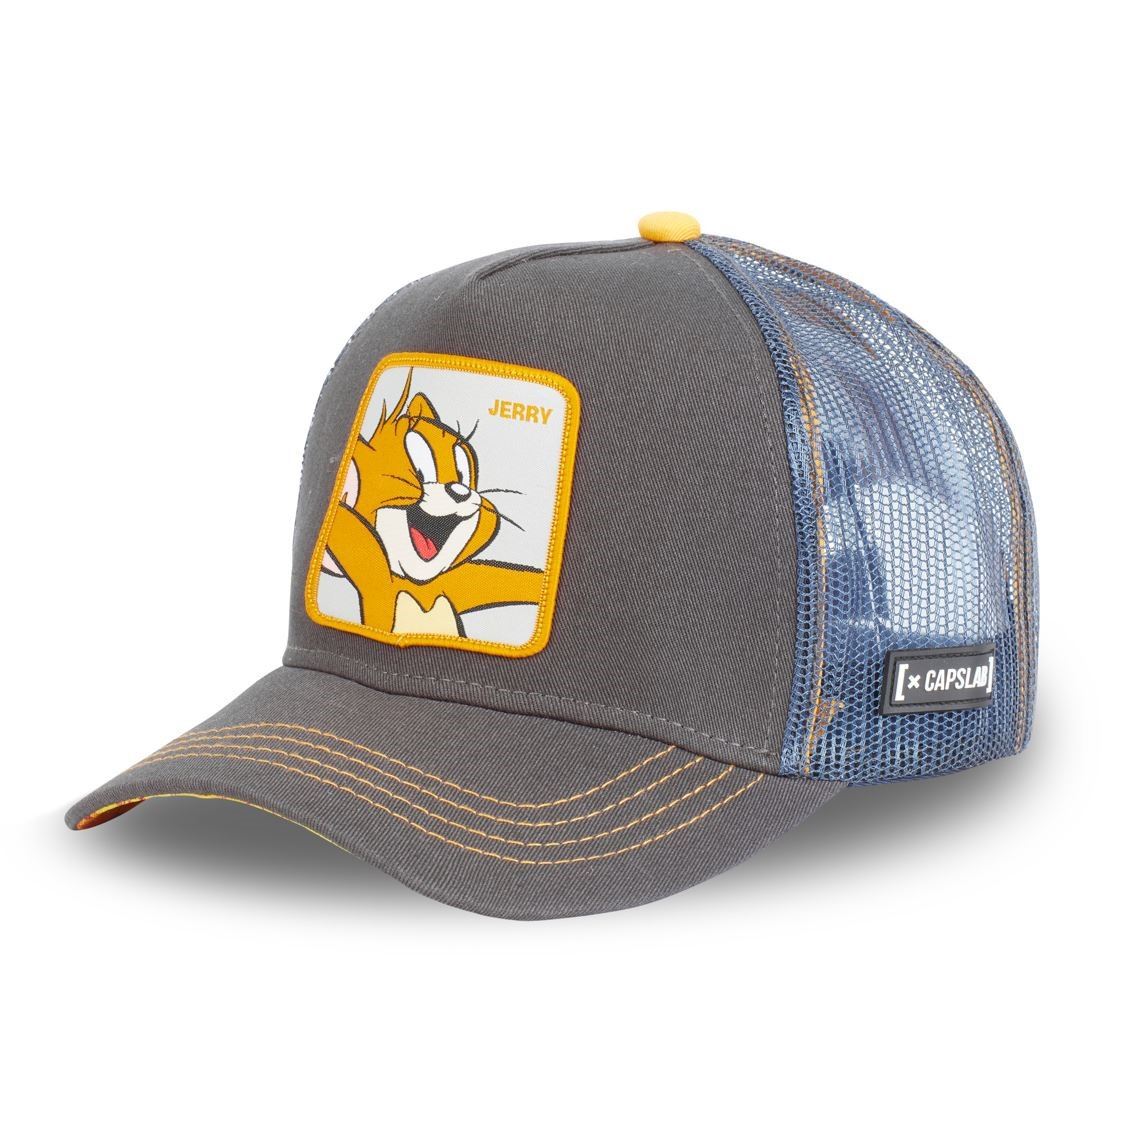 Jerry Grey Tom and Jerry Trucker Cap Capslab